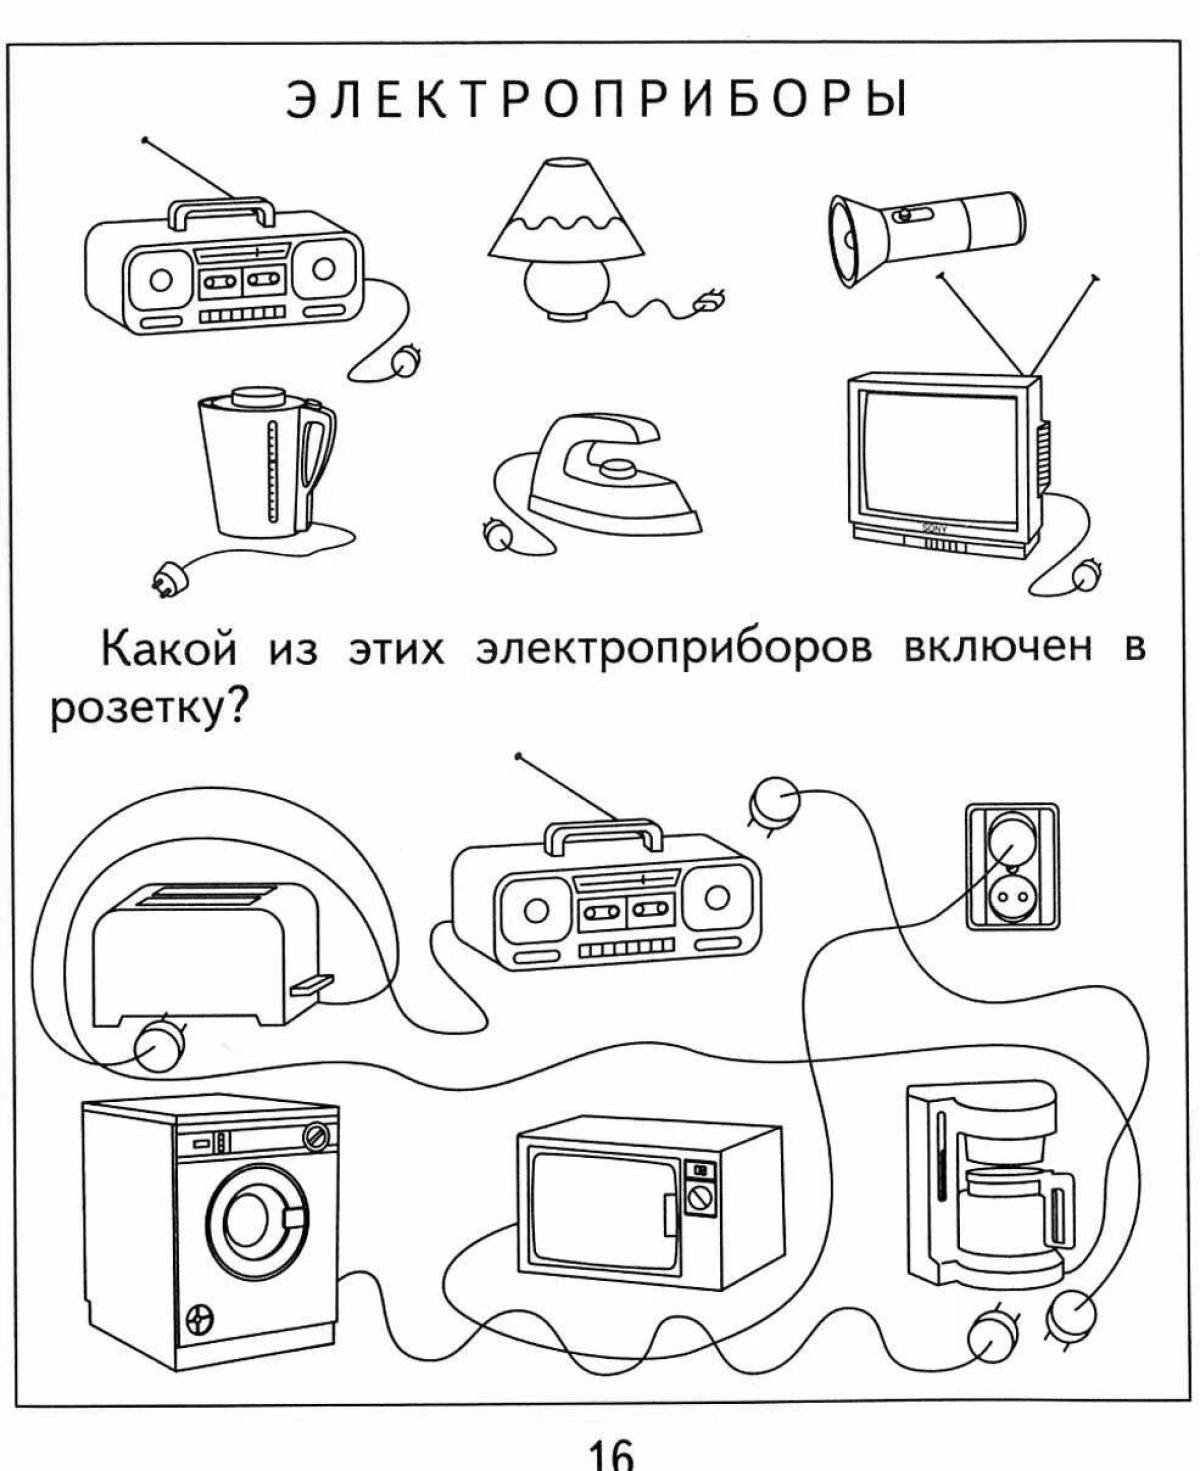 Coloring pages of electrical appliances for children aged 5-6